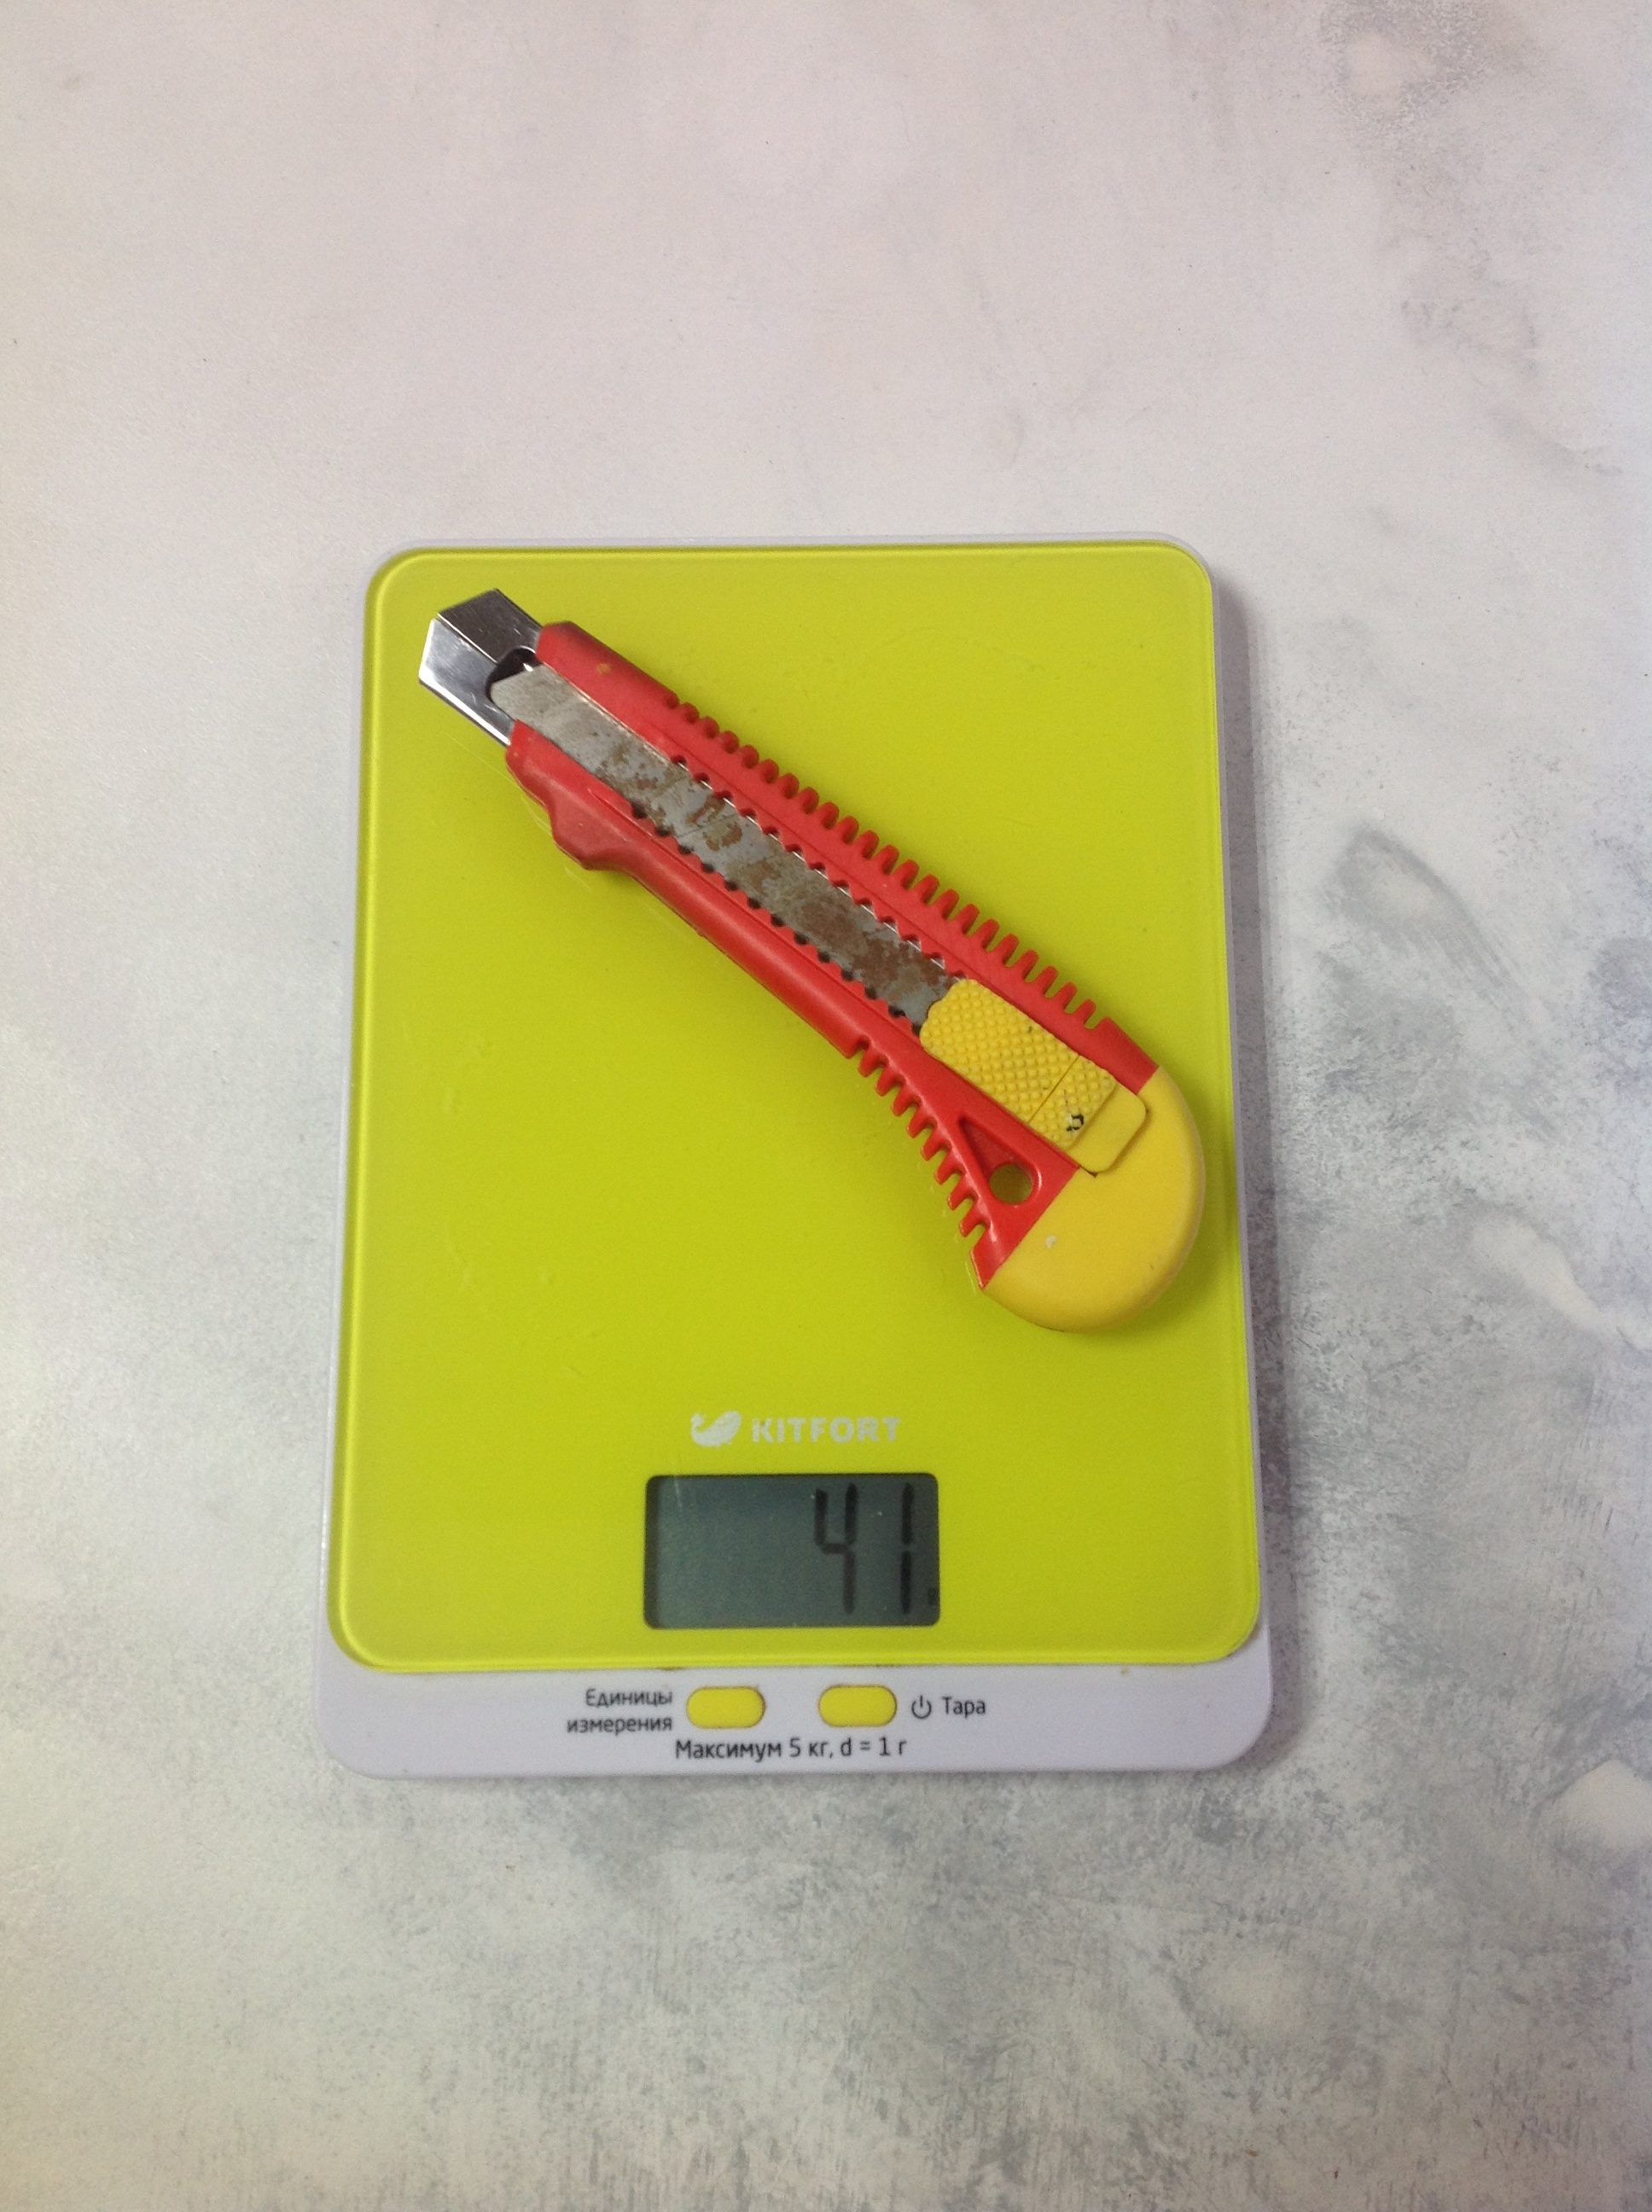 How much does a utility knife weigh?